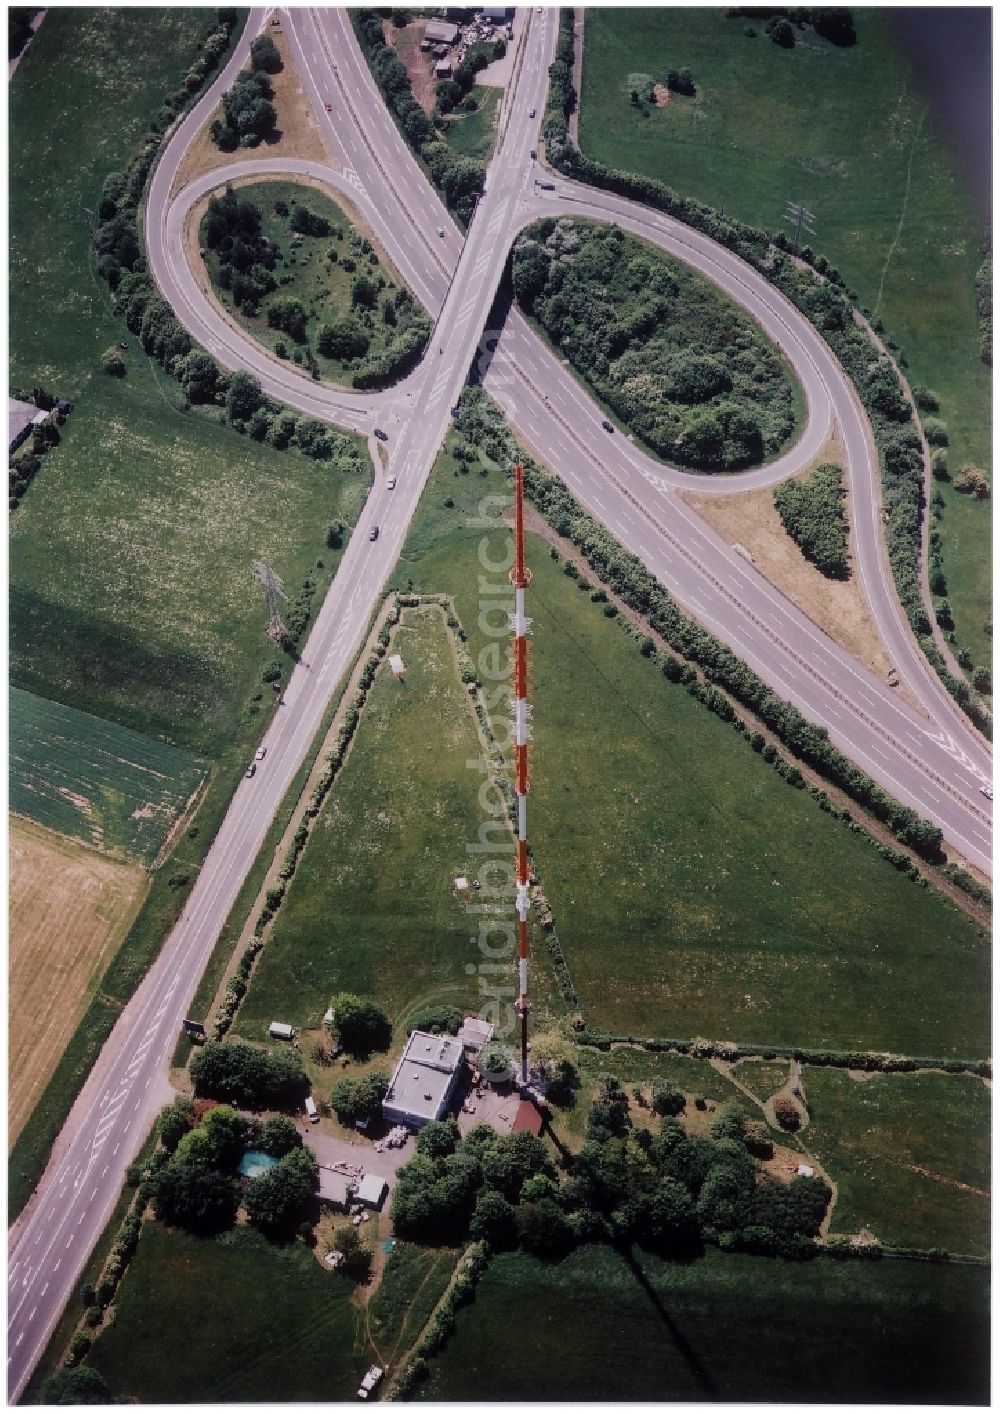 Göttelborn from the bird's eye view: Steel mast funkturm and transmission system as basic network transmitter in Goettelborn in the state Saarland